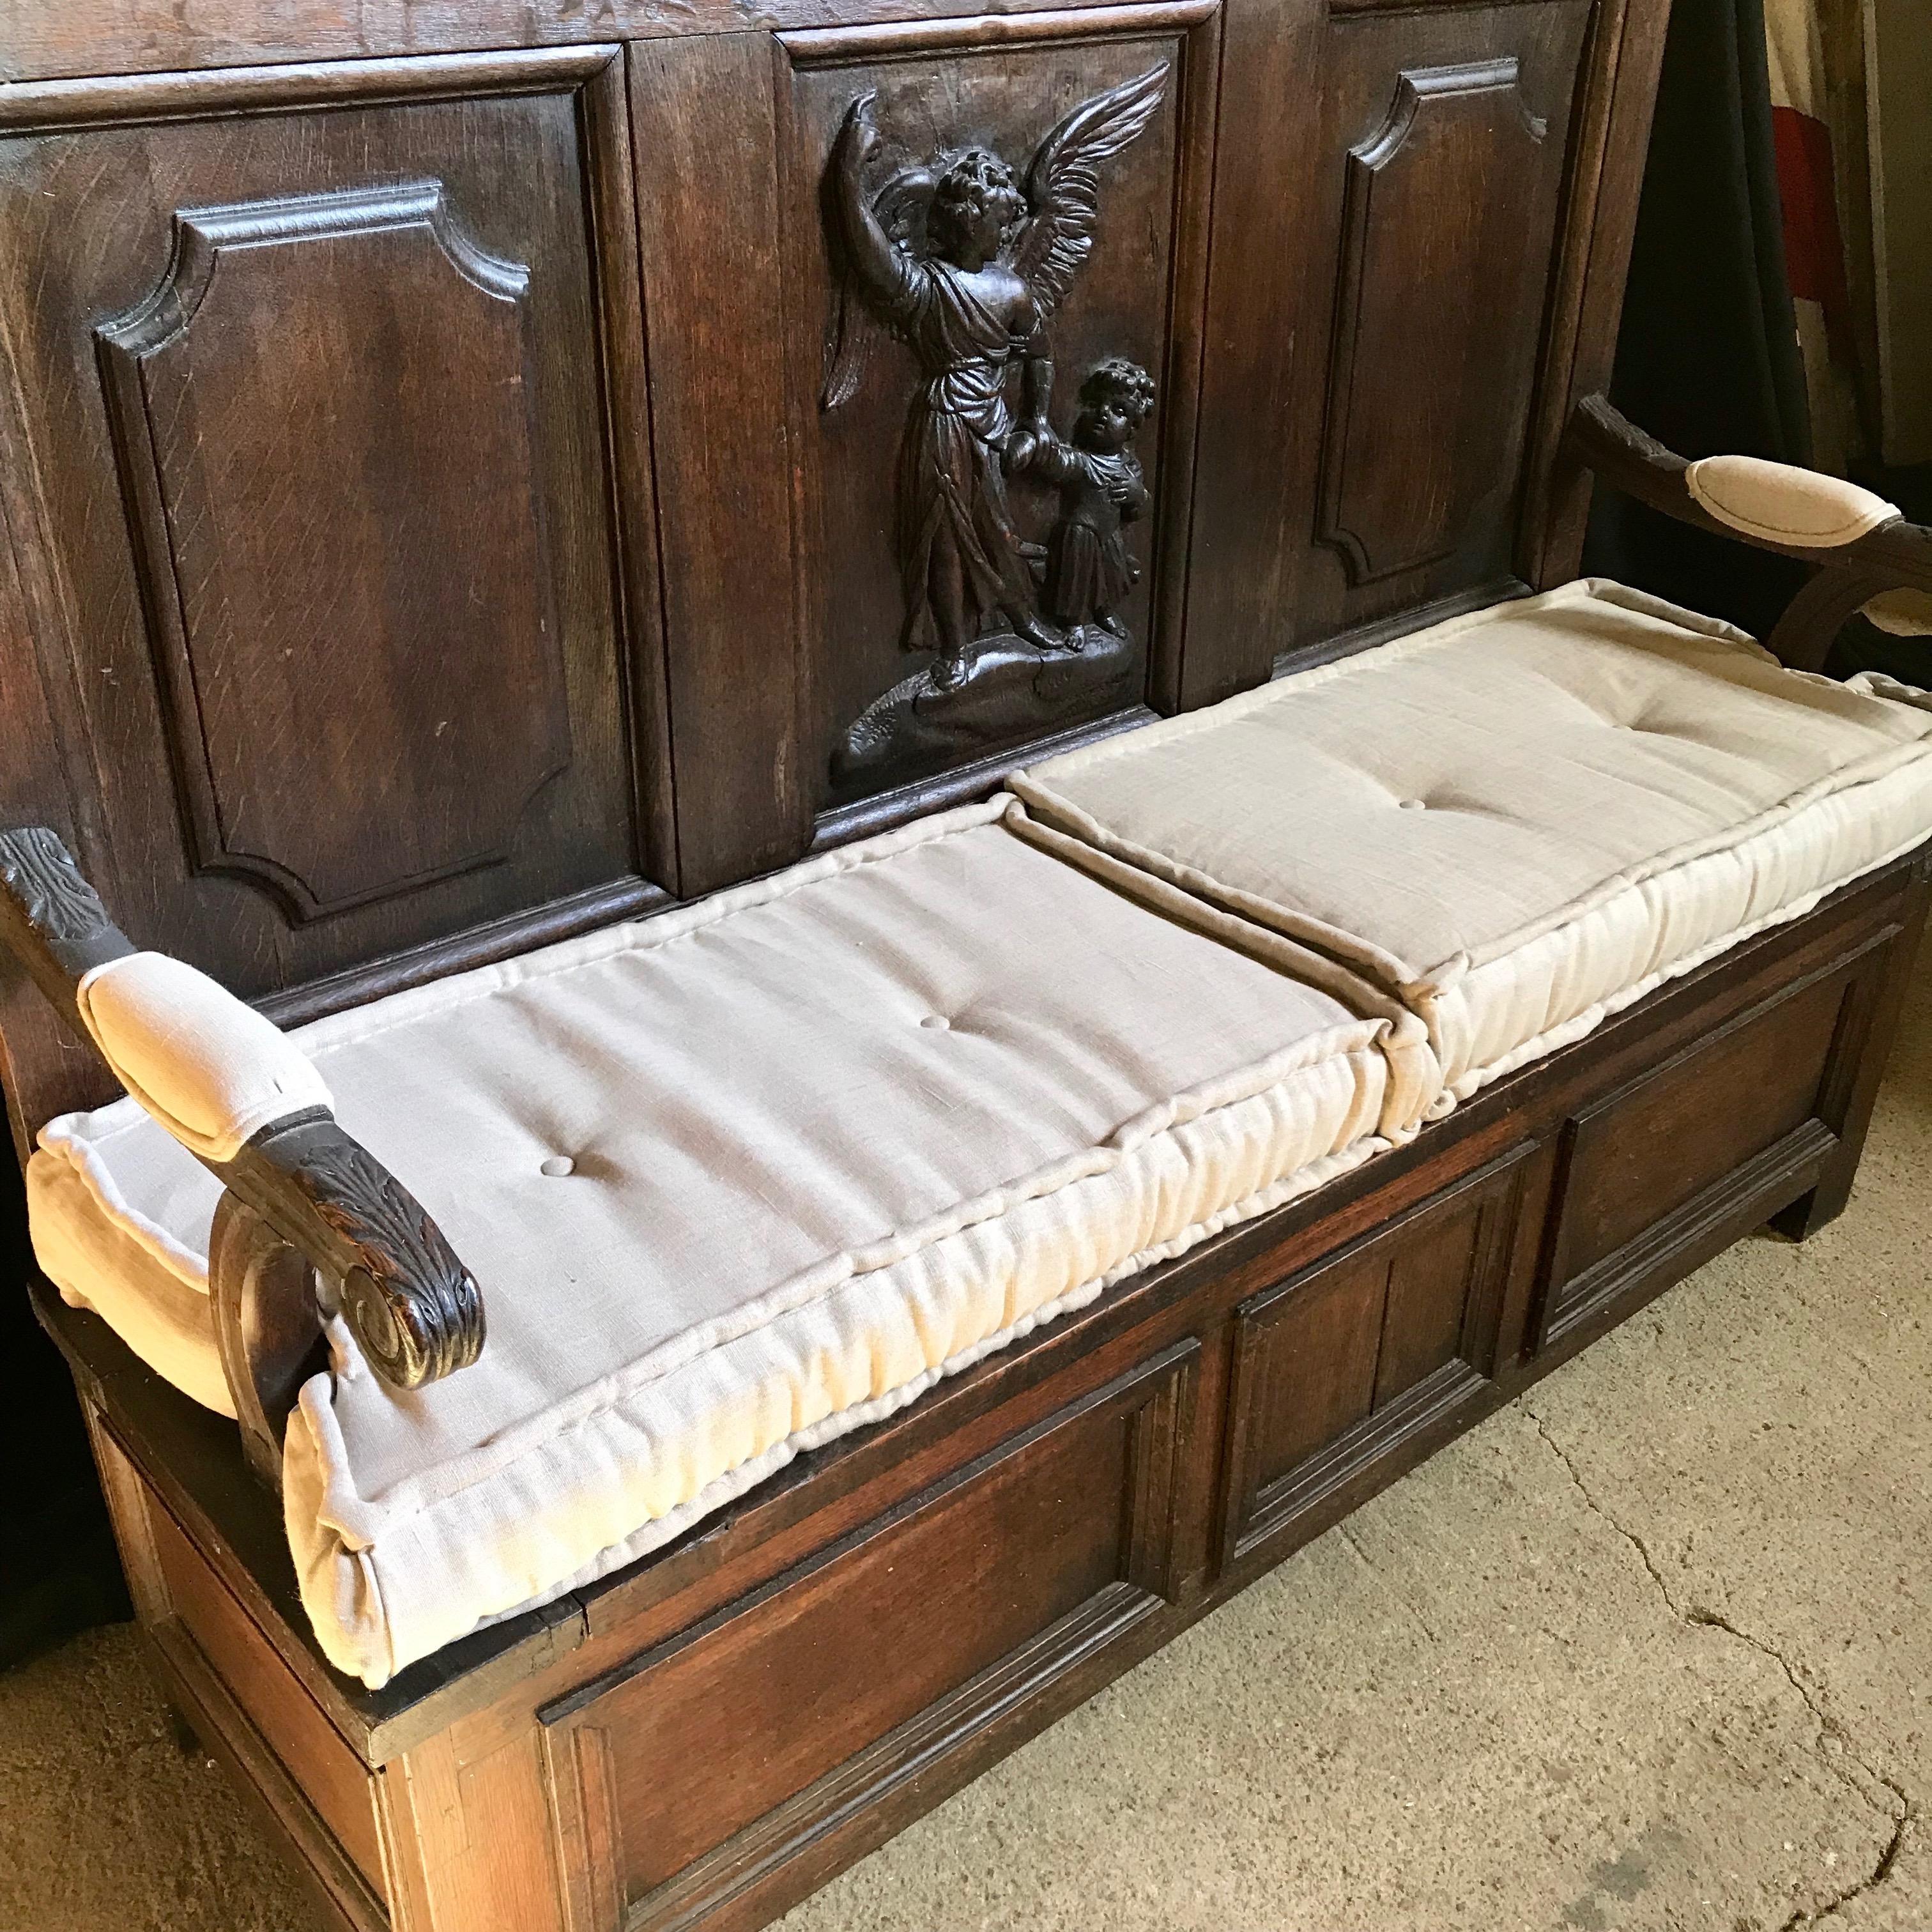 A very impressive high back French bench having gorgeous carved central angelic figure, carved wood curlicue arms with upholstered arm rests, and a seat that lifts to reveal storage inside. Comes with new white duck seat cushions. #4863

arm height